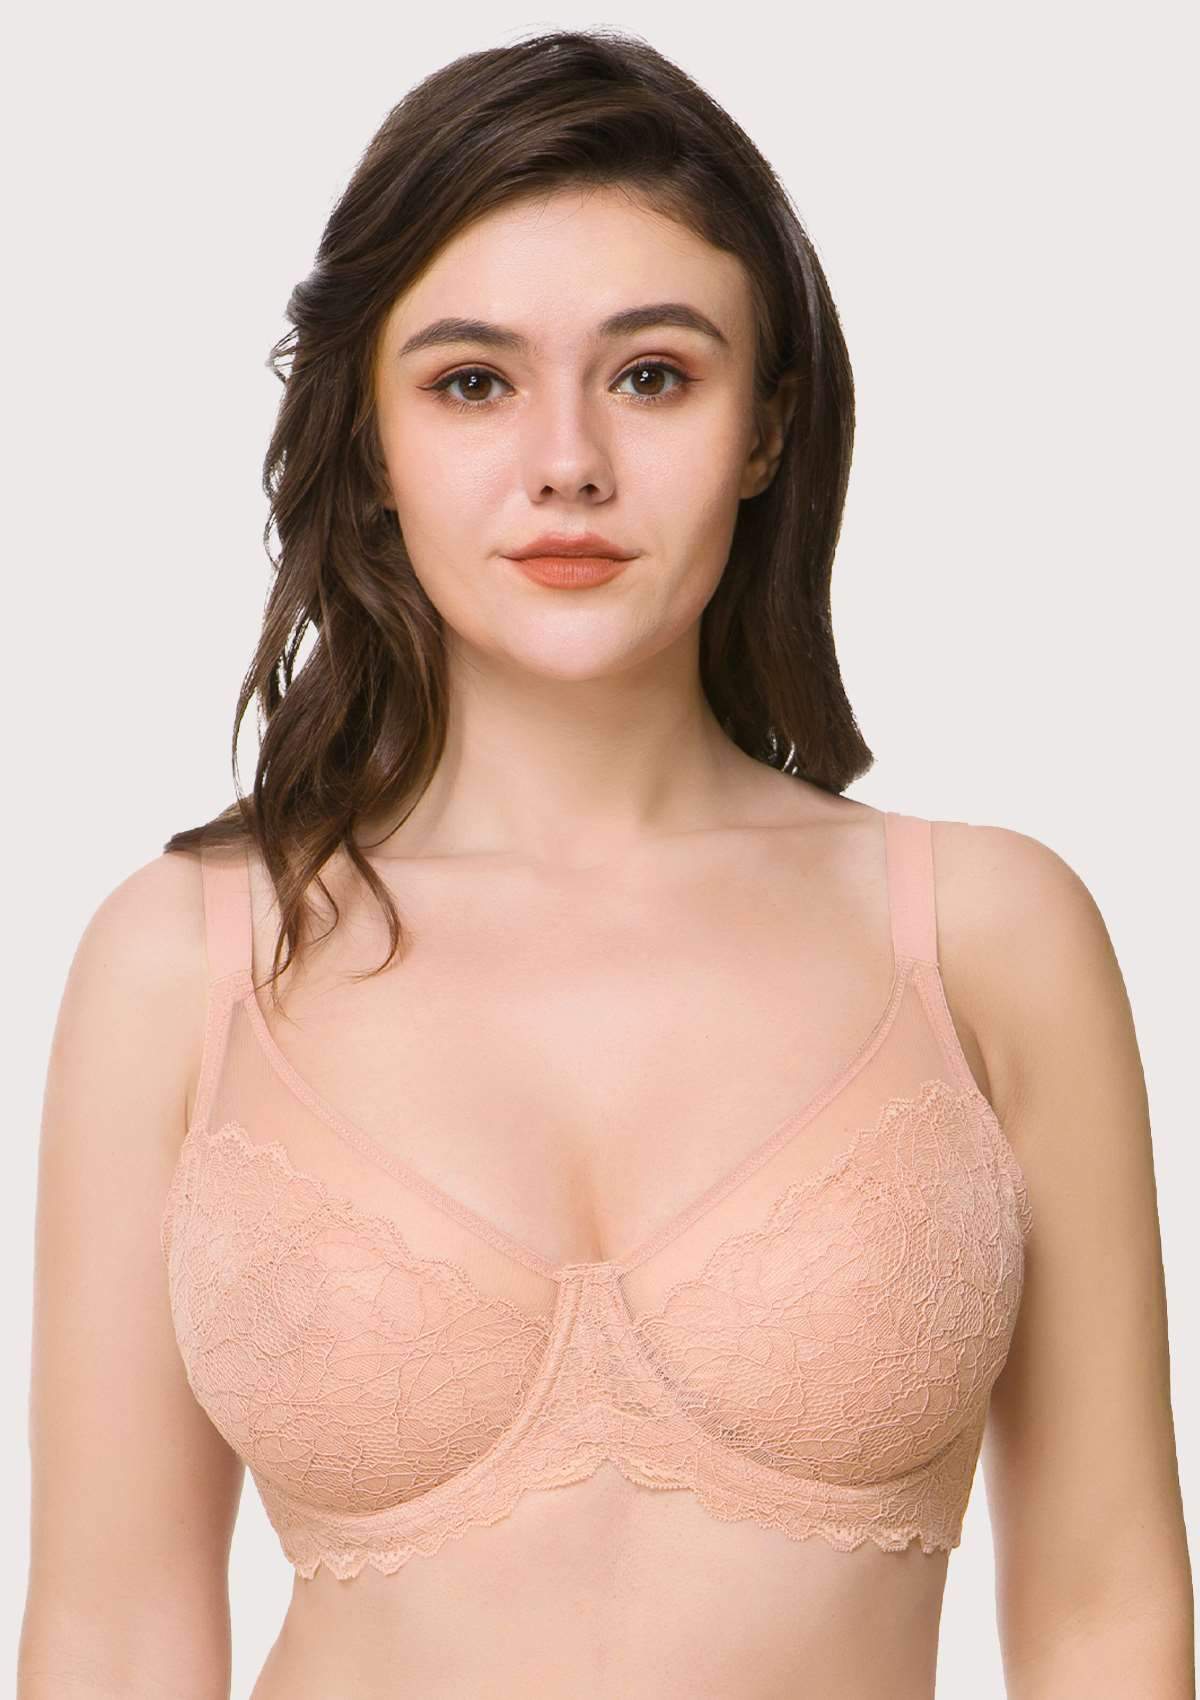 HSIA Wisteria Bra For Lift And Support - Full Coverage Minimizer Bra - Light Pink / 36 / D